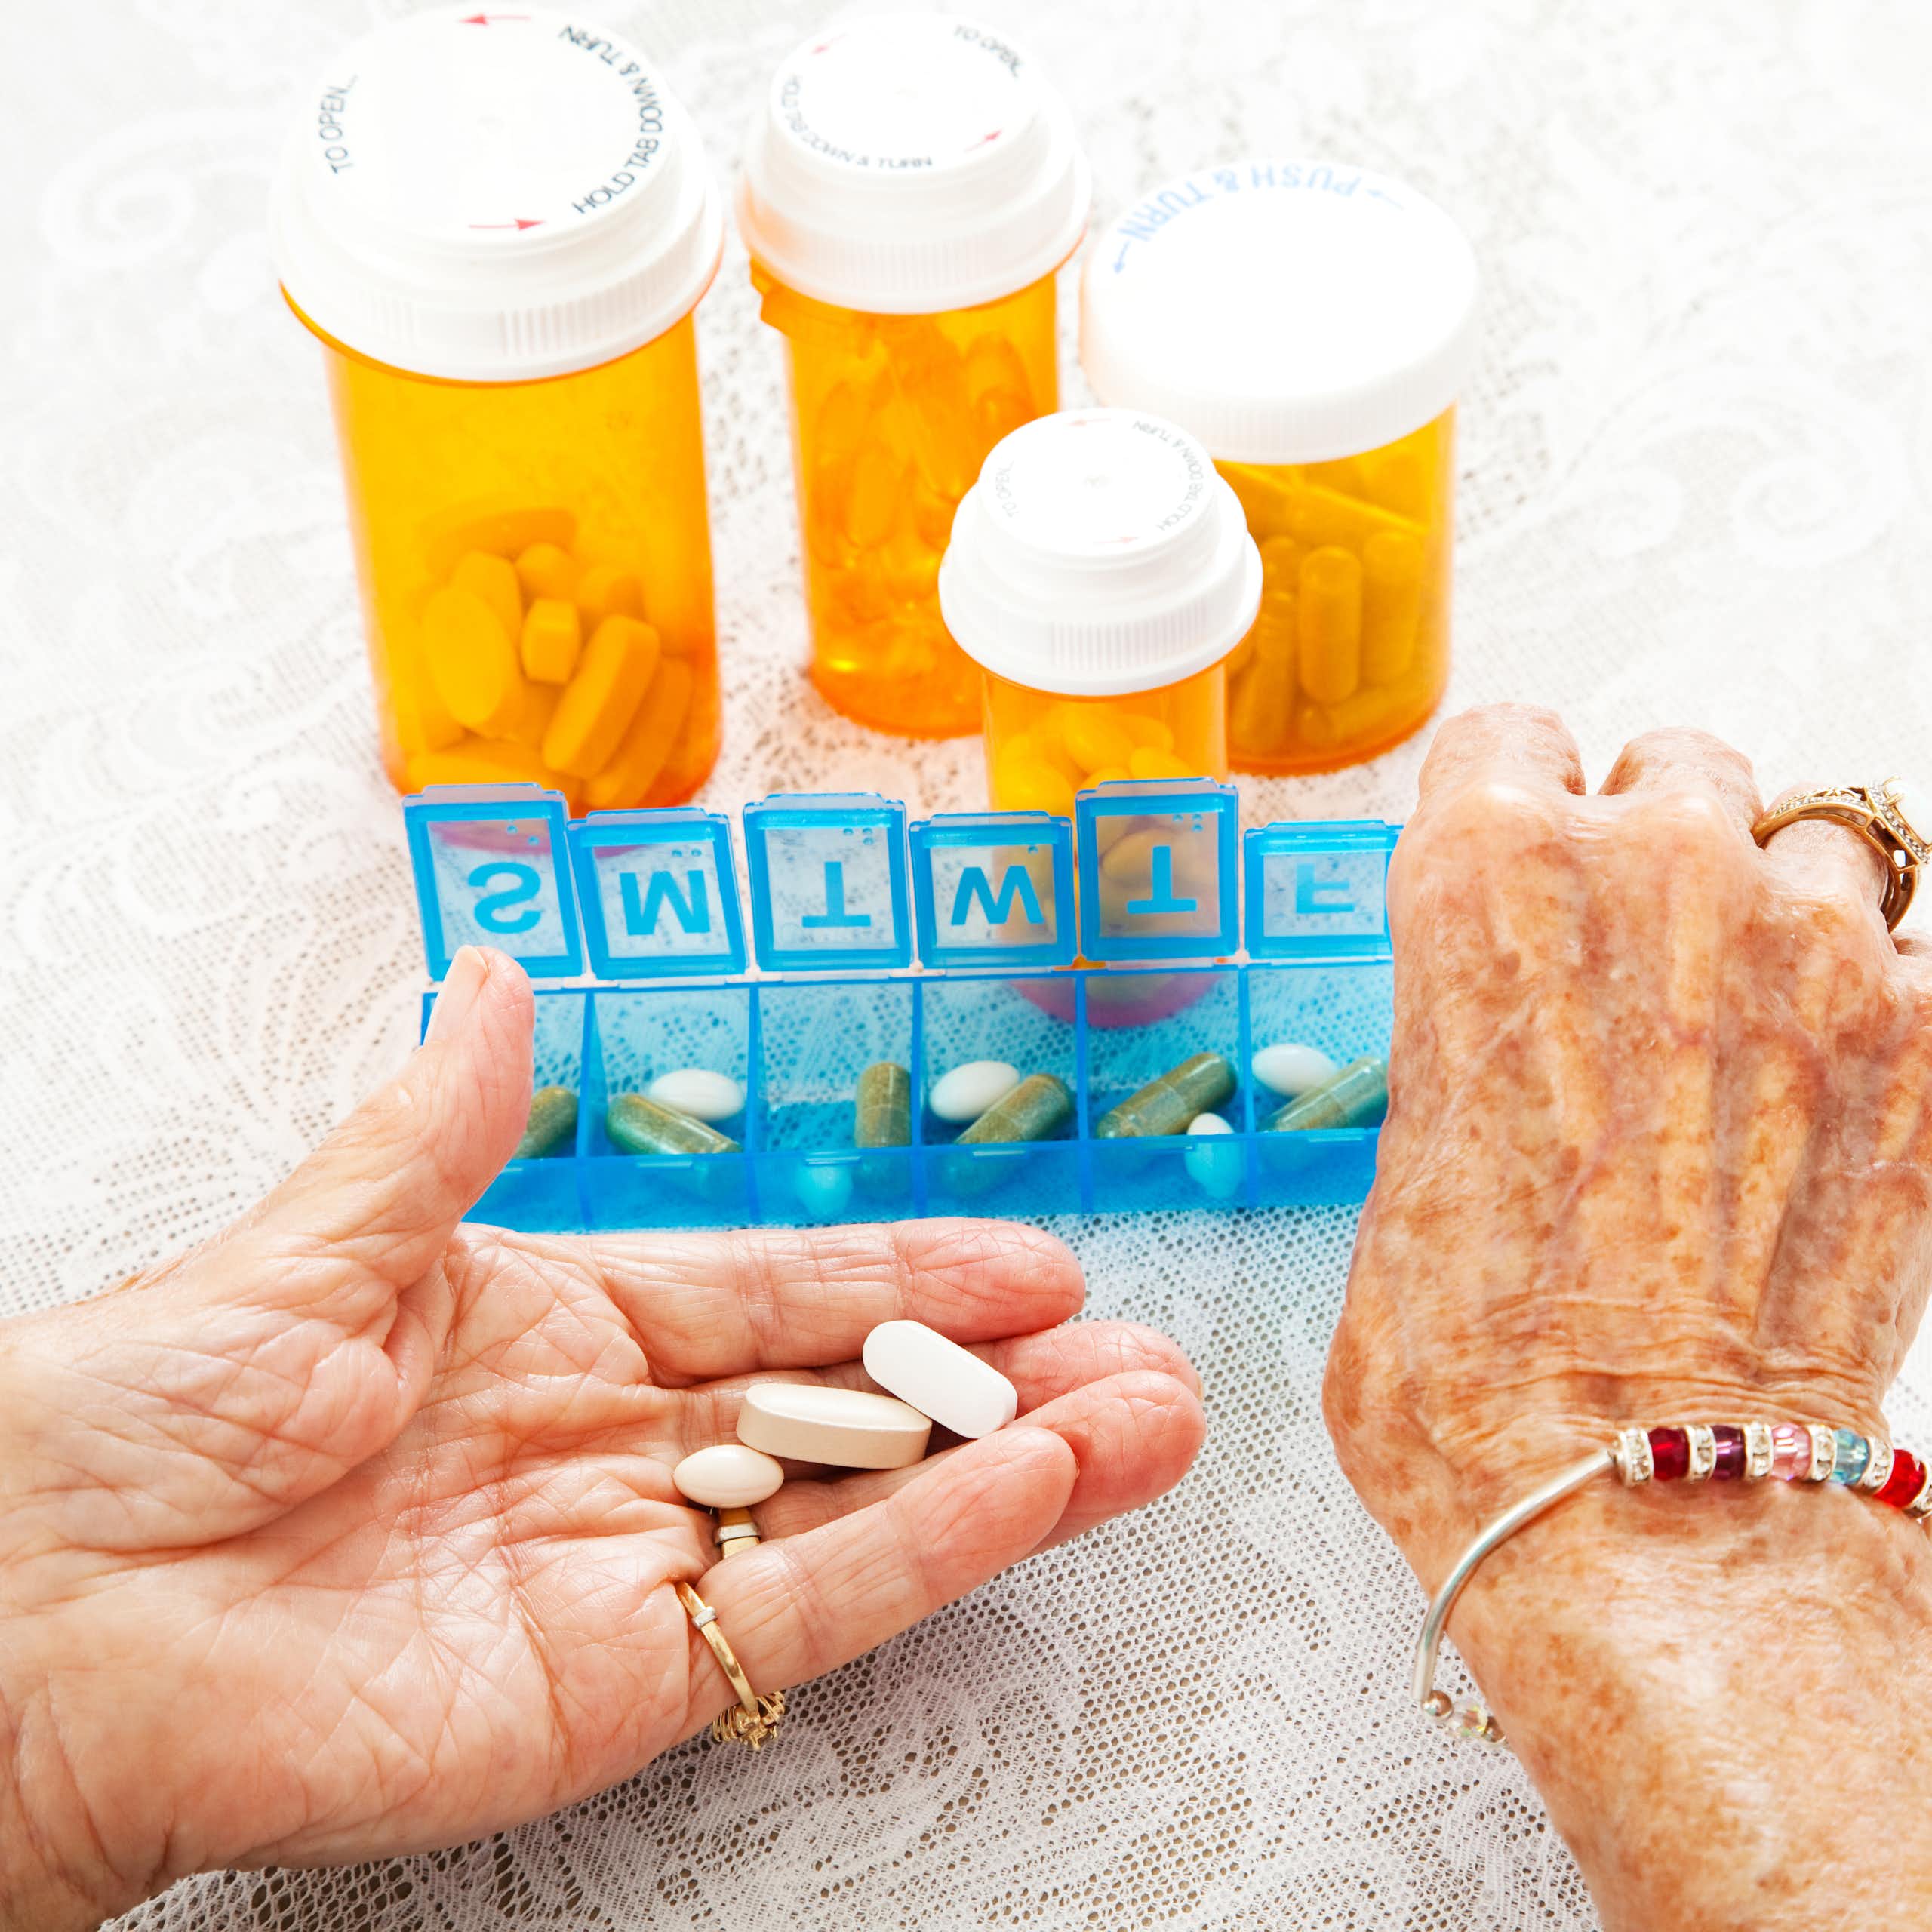 The hands of an elderly person taking medication in a box